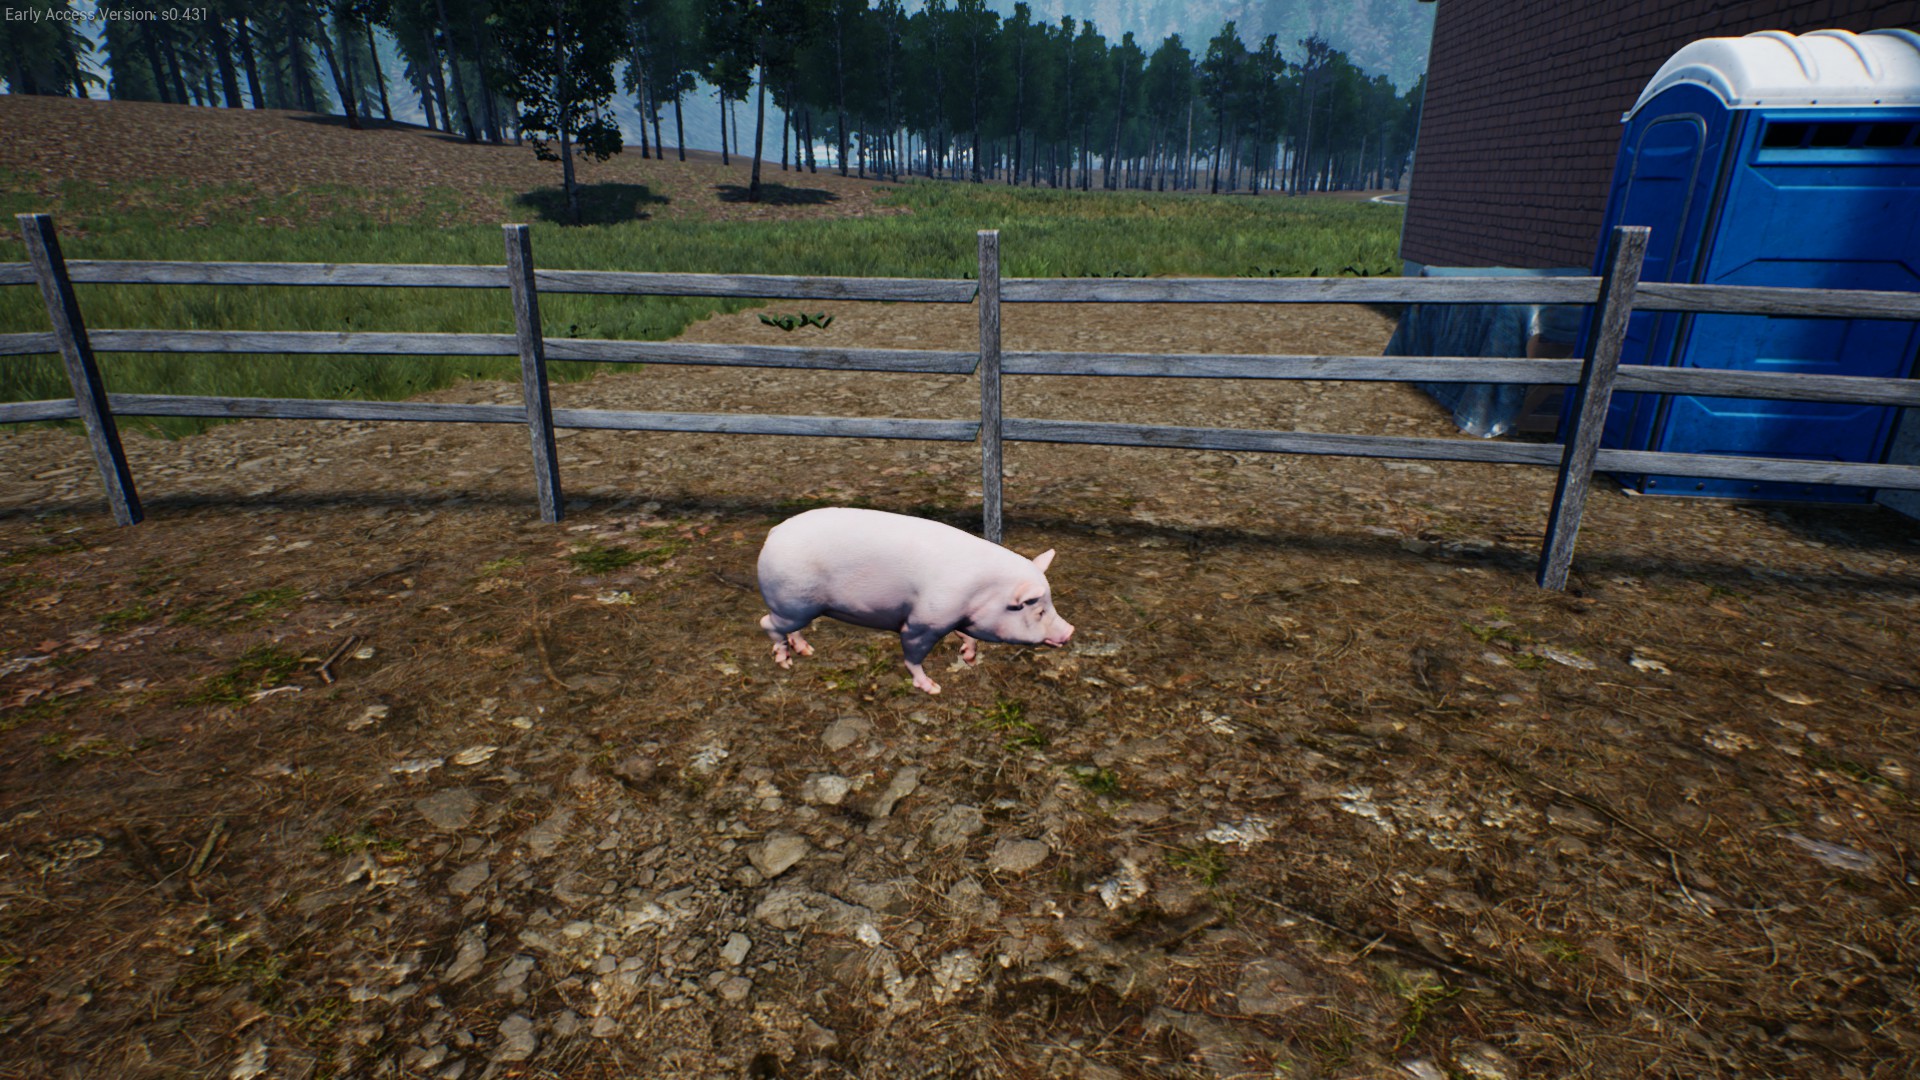 Ranch Simulator Complete Guide + Basic Gameplay Tips - Pigs